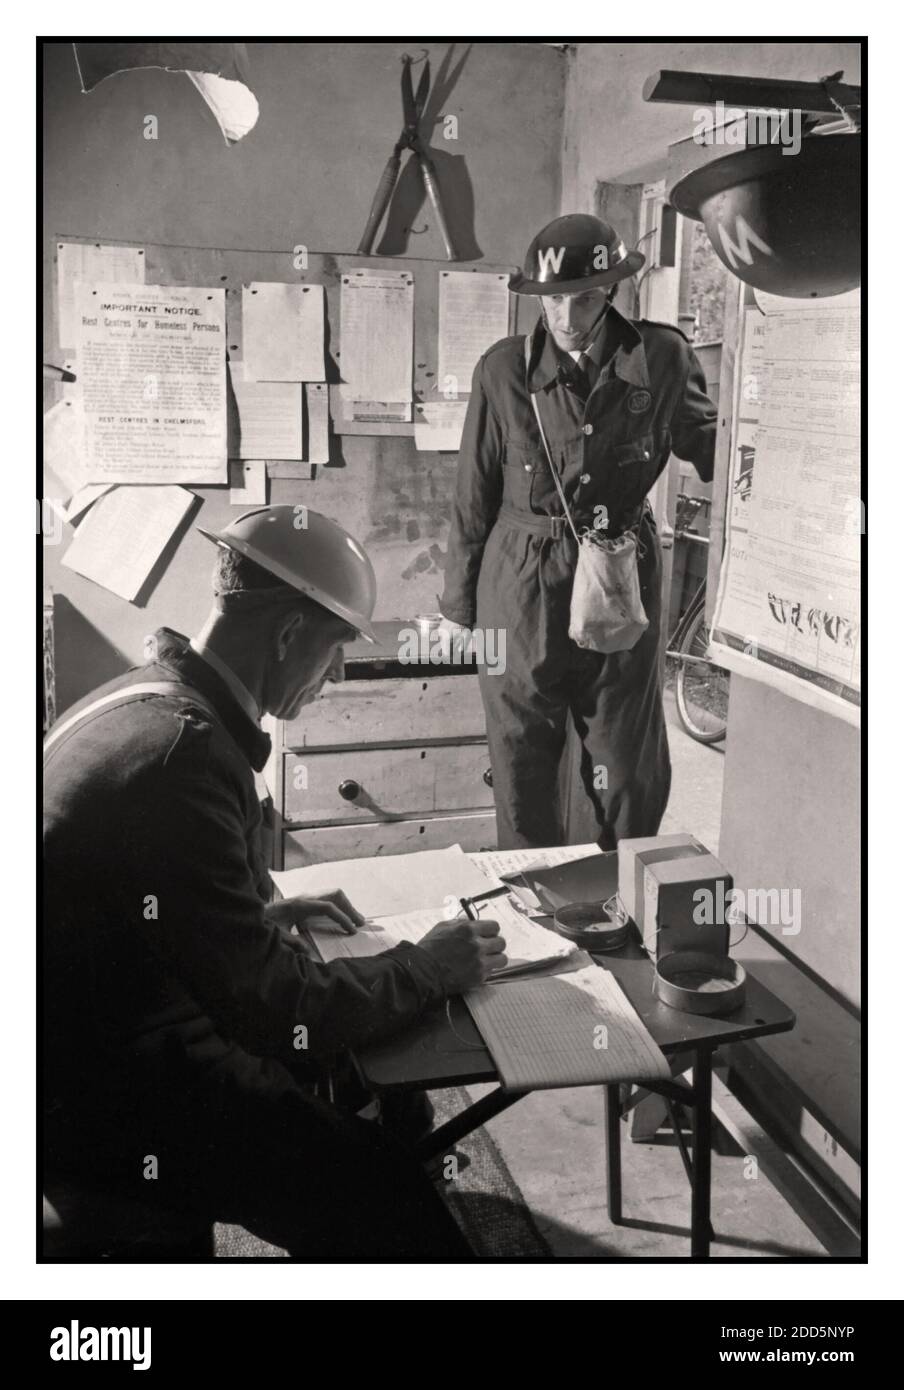 WW2 British Air Raid Precautions Warden reports for duty to the Chief Warden at his local ARP post in Springfield, Essex, AUGUST 1941. An Air Raid Precautions Warden in uniform with helmet reports for duty to the Chief ARP Warden, Mr Davies, at his local ARP post in Springfield, Essex. 1941 Stock Photo